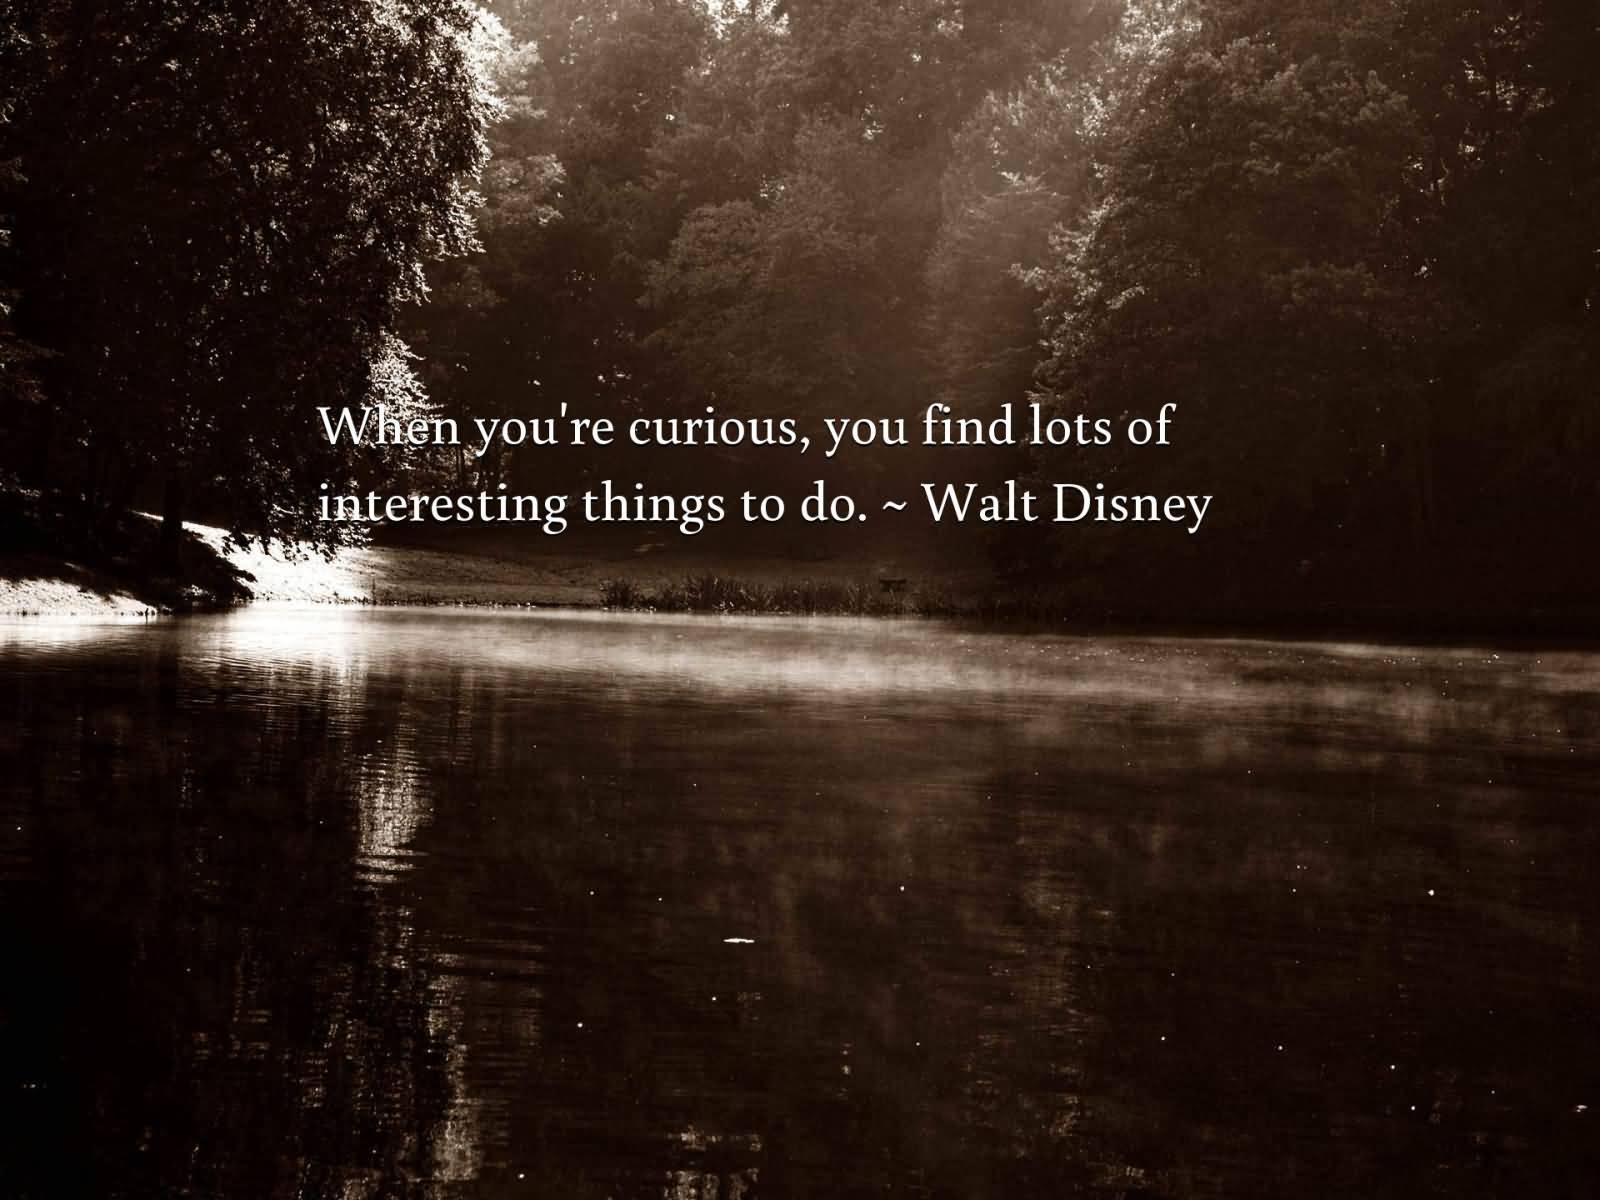 When you're curious, you find lots of interesting things to do  - Walt Disney